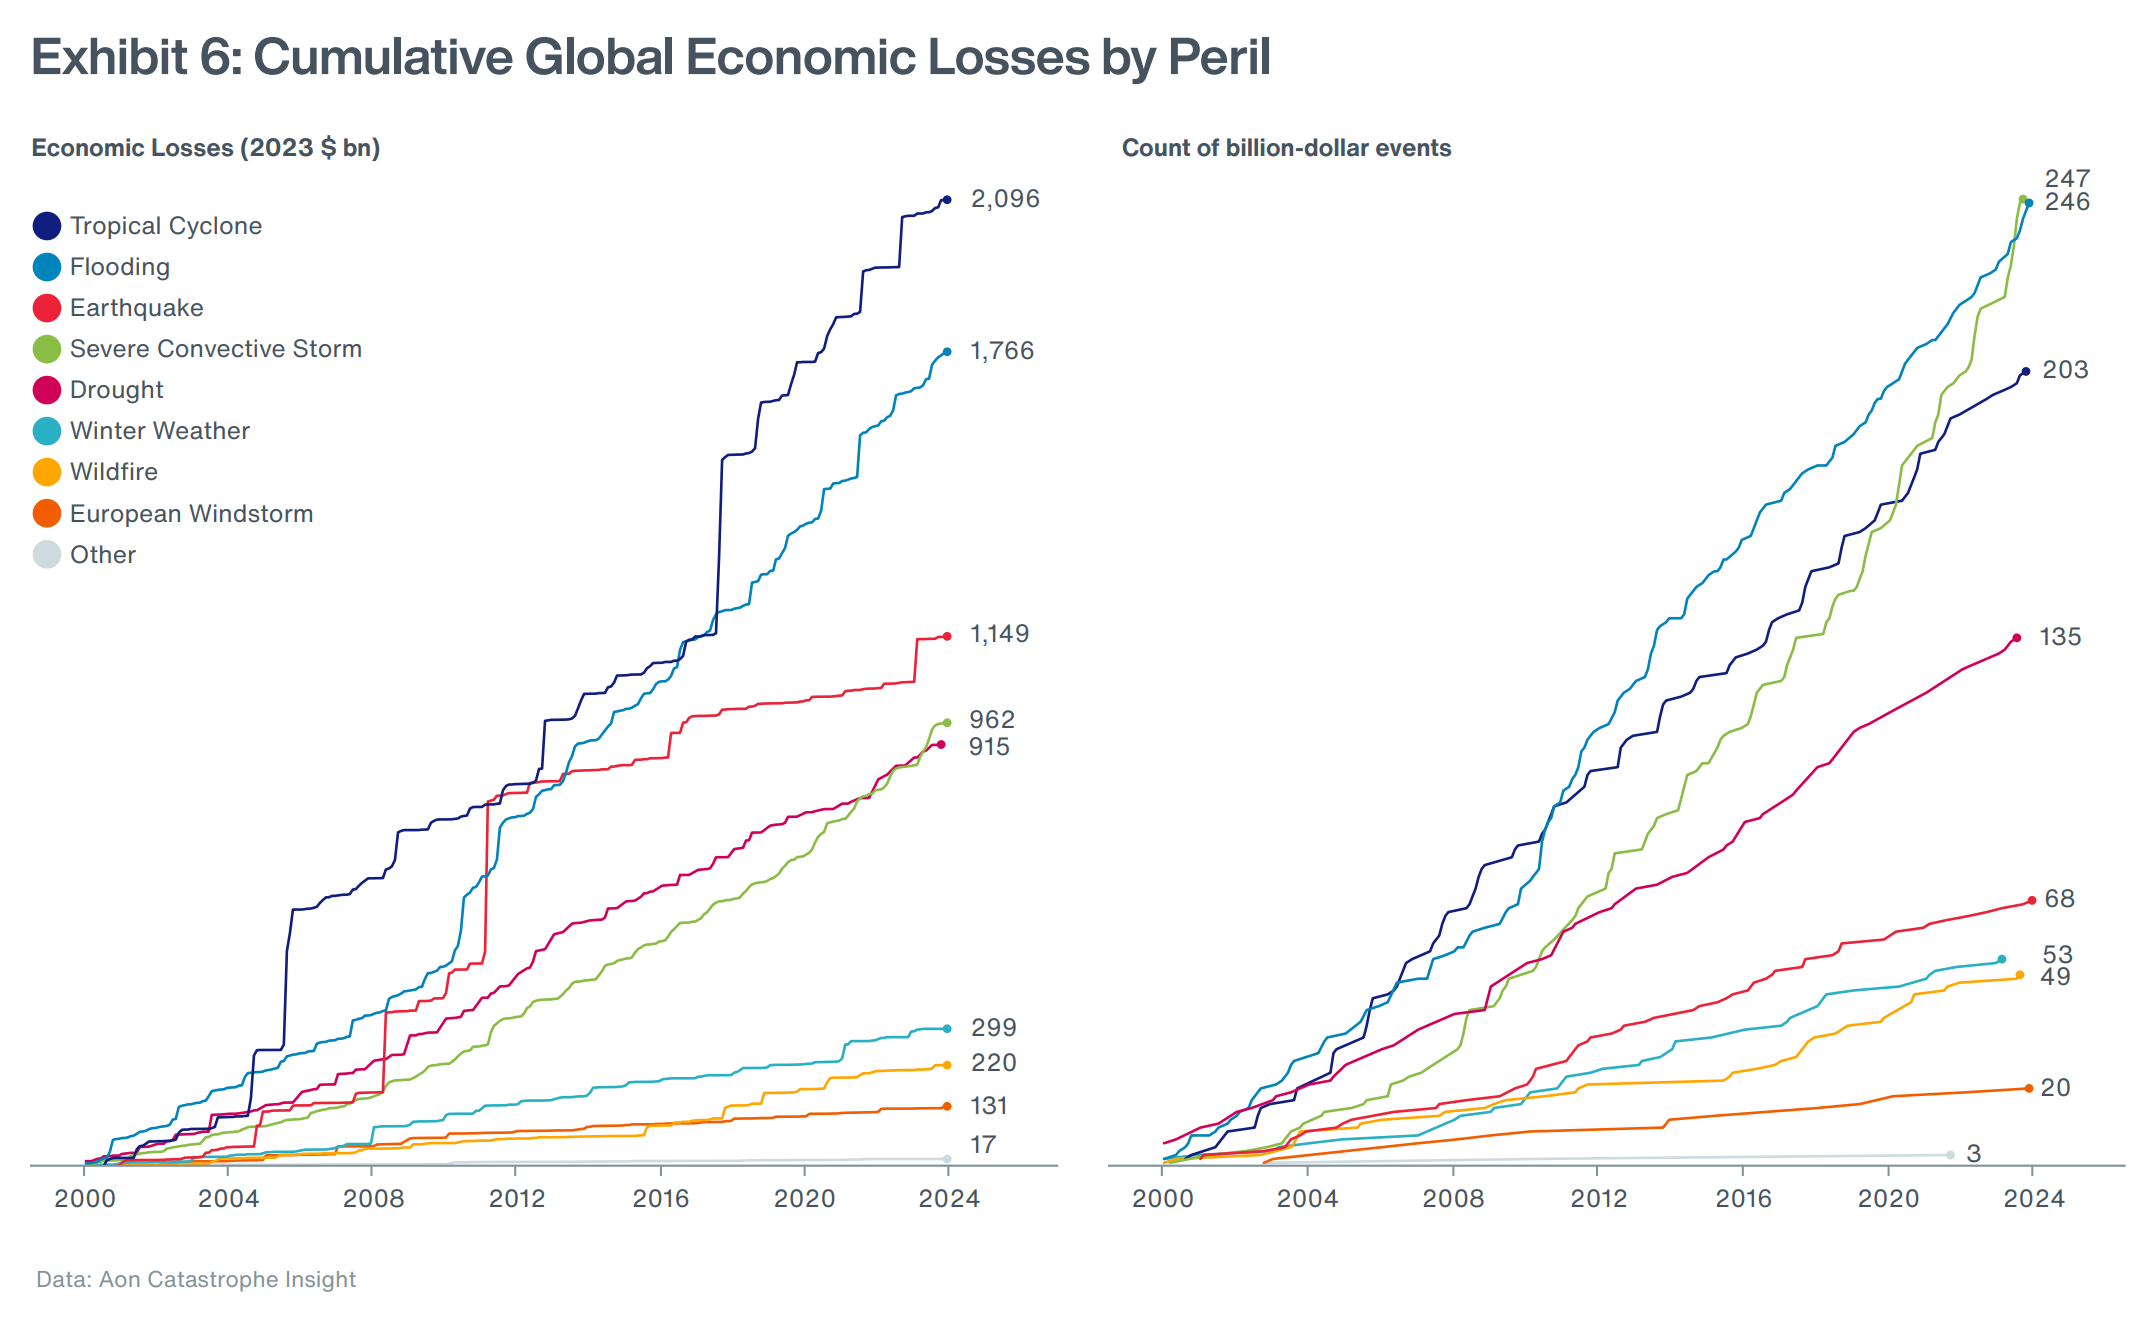 Cumulative global economic losses by peril, 2000-2023. Tropical cyclone and flooding remained the costliest perils of the 21st century on a cumulative basis. Despite its significant loss potential, earthquake ranked first for only a short period of time in 2011 after a series of costly events. Despite the extreme loss year in 2023, earthquake may lose its third position in the following years due to the accelerating growth of the severe convective storm peril, driven by the aforementioned increasing frequency of medium-size events. Notably, SCS overtook flooding in terms of the cumulative number of billion-dollar events in 2023. There were at least 28 such SCS events in 2023 — 23 of which occurred in the United States and 5 took place in Europe. Graphic: Aon